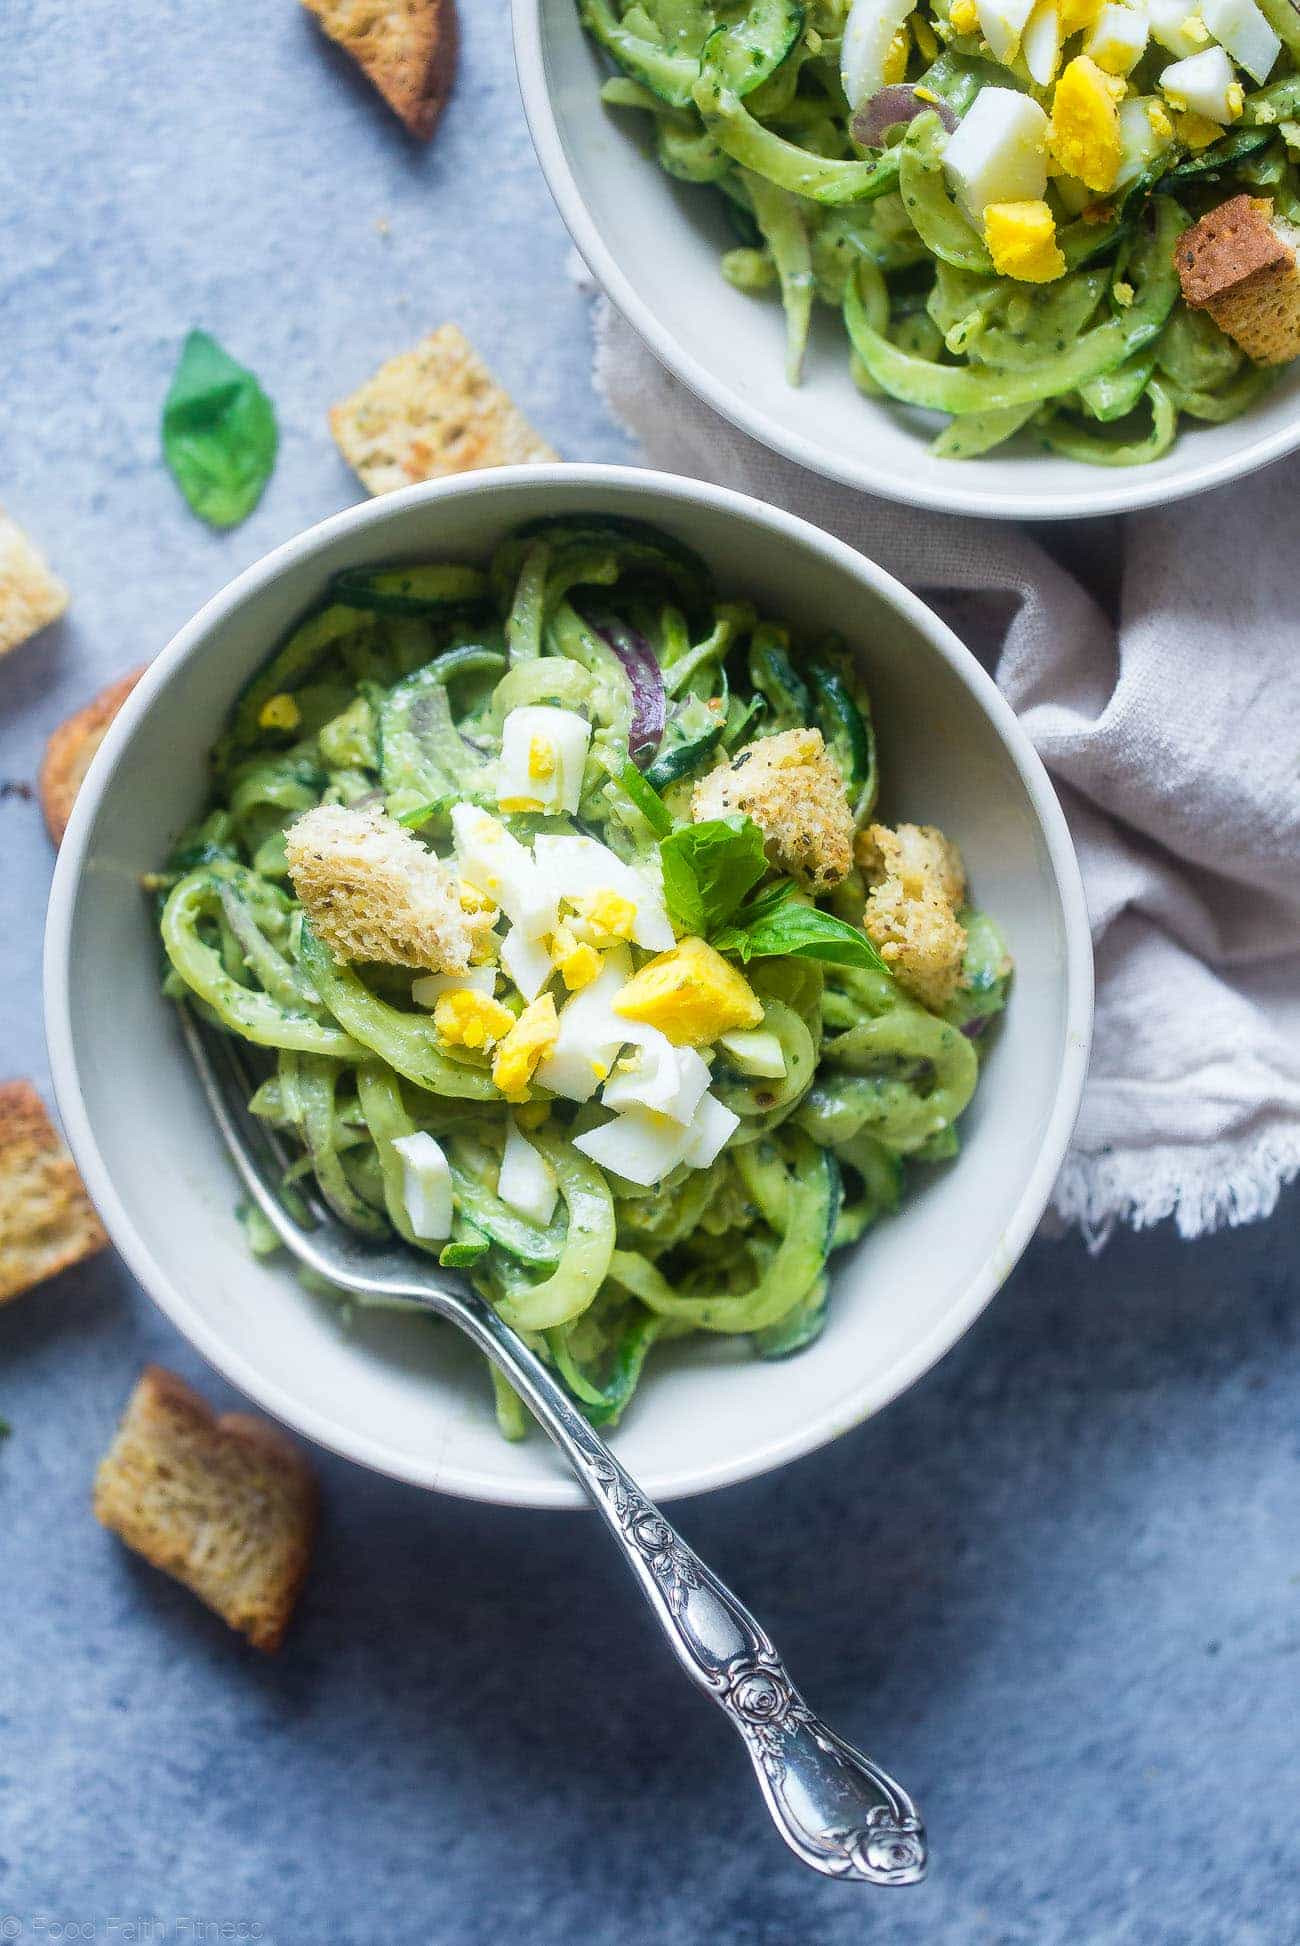 Healthy Pasta Side Dishes
 Avocado Pesto Healthy Pasta Salad with Zucchini Noodles